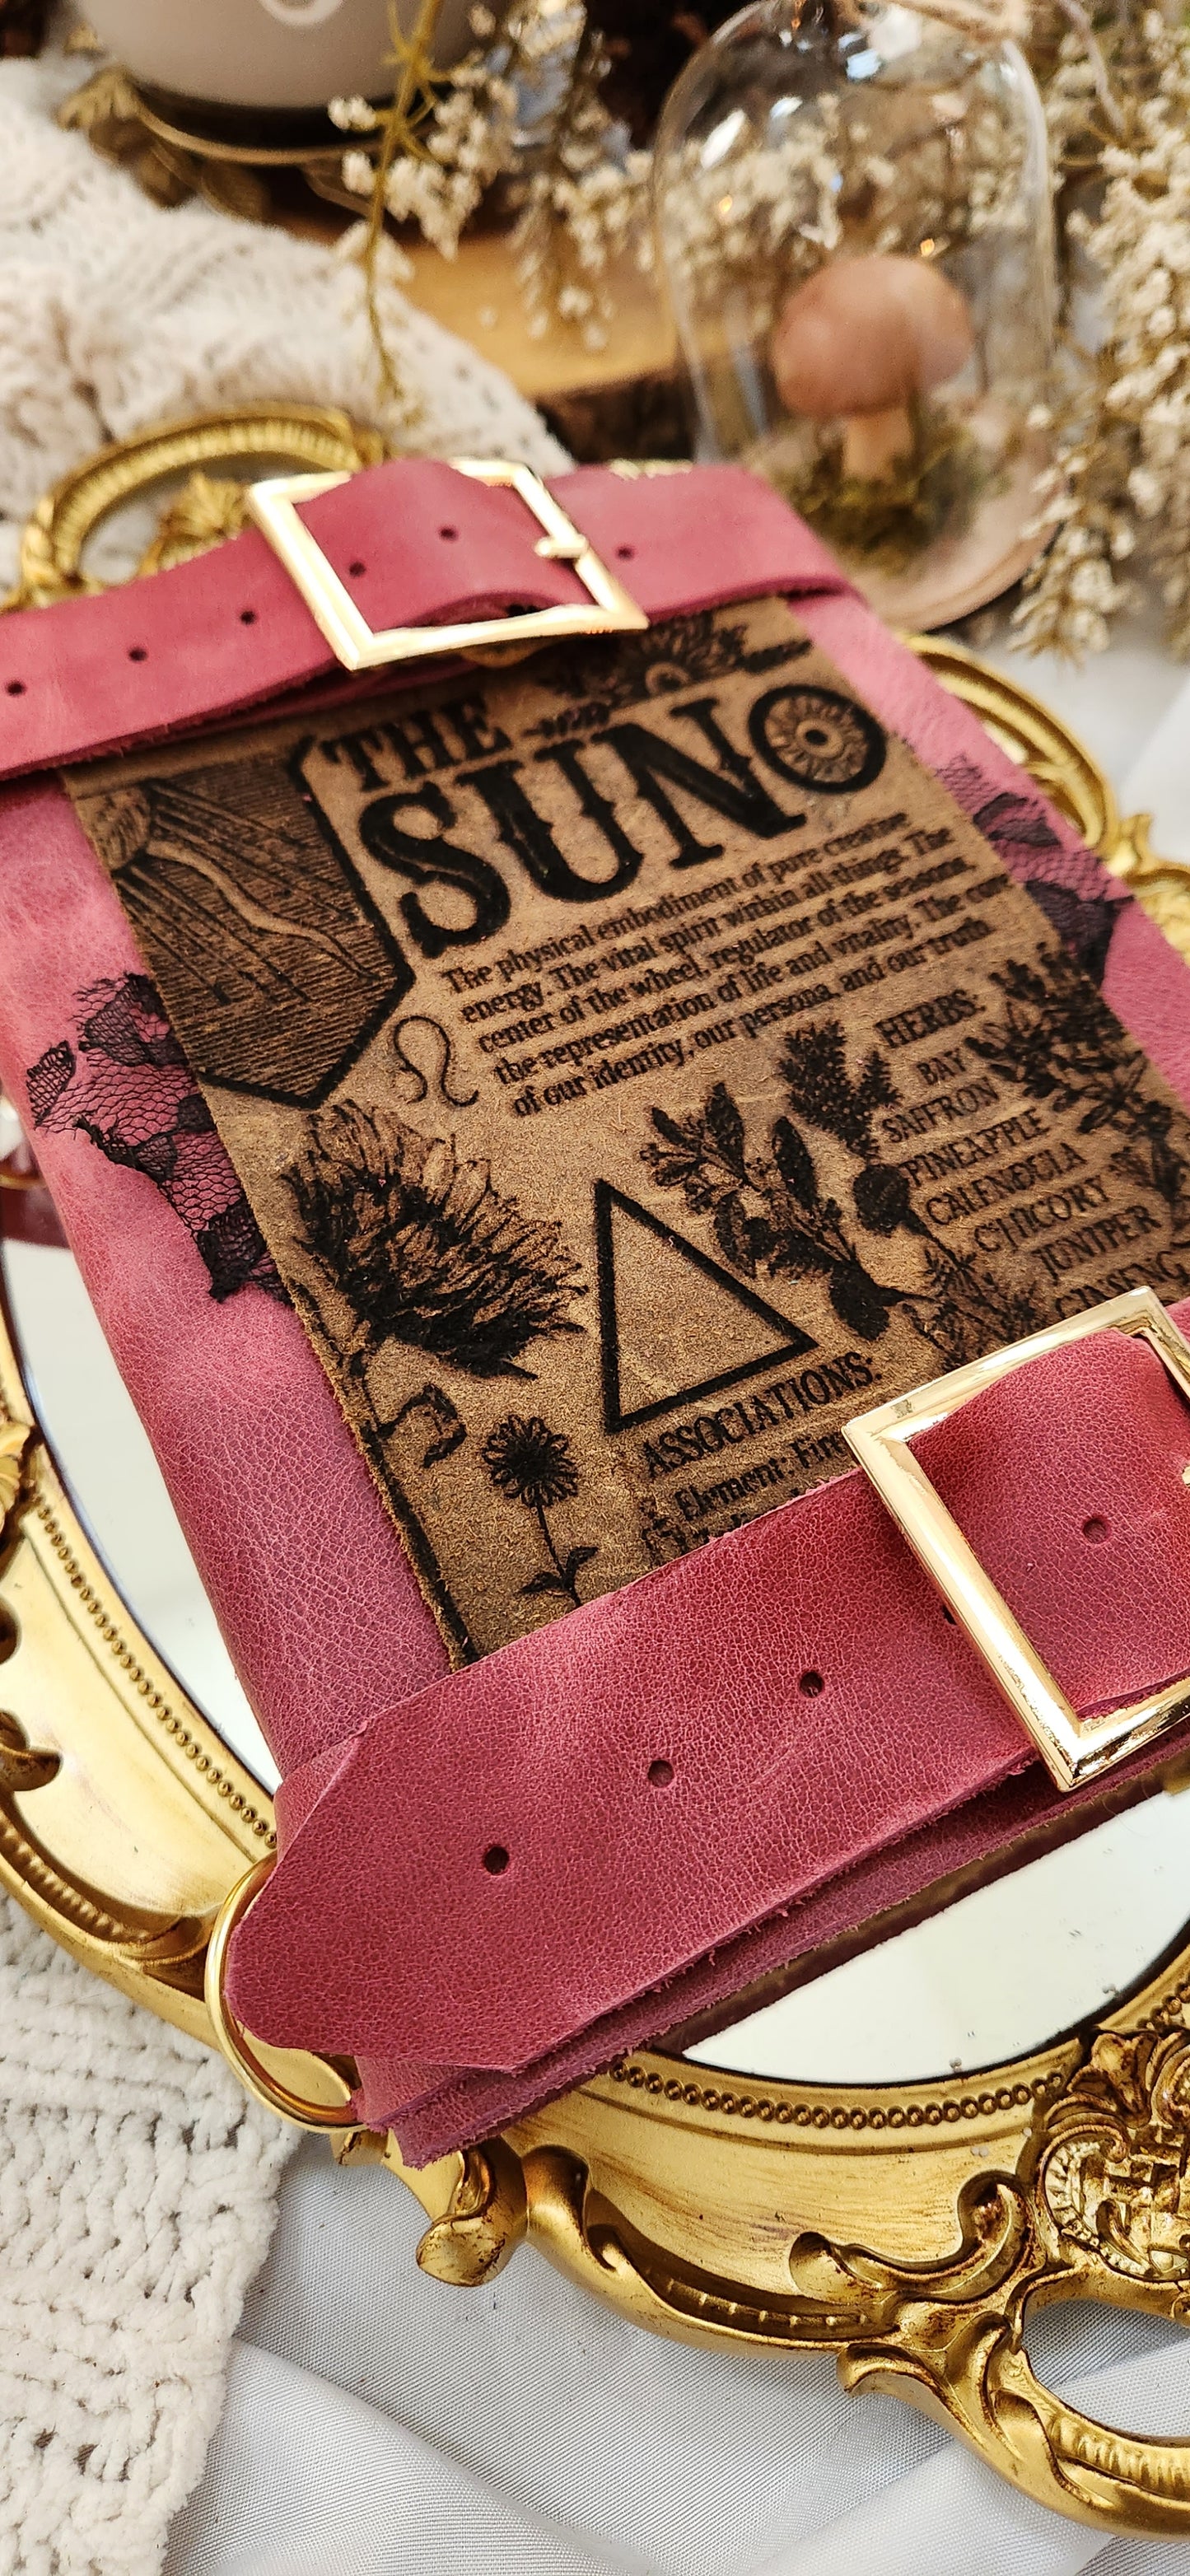 The Sun Leather Journal & sketchbook